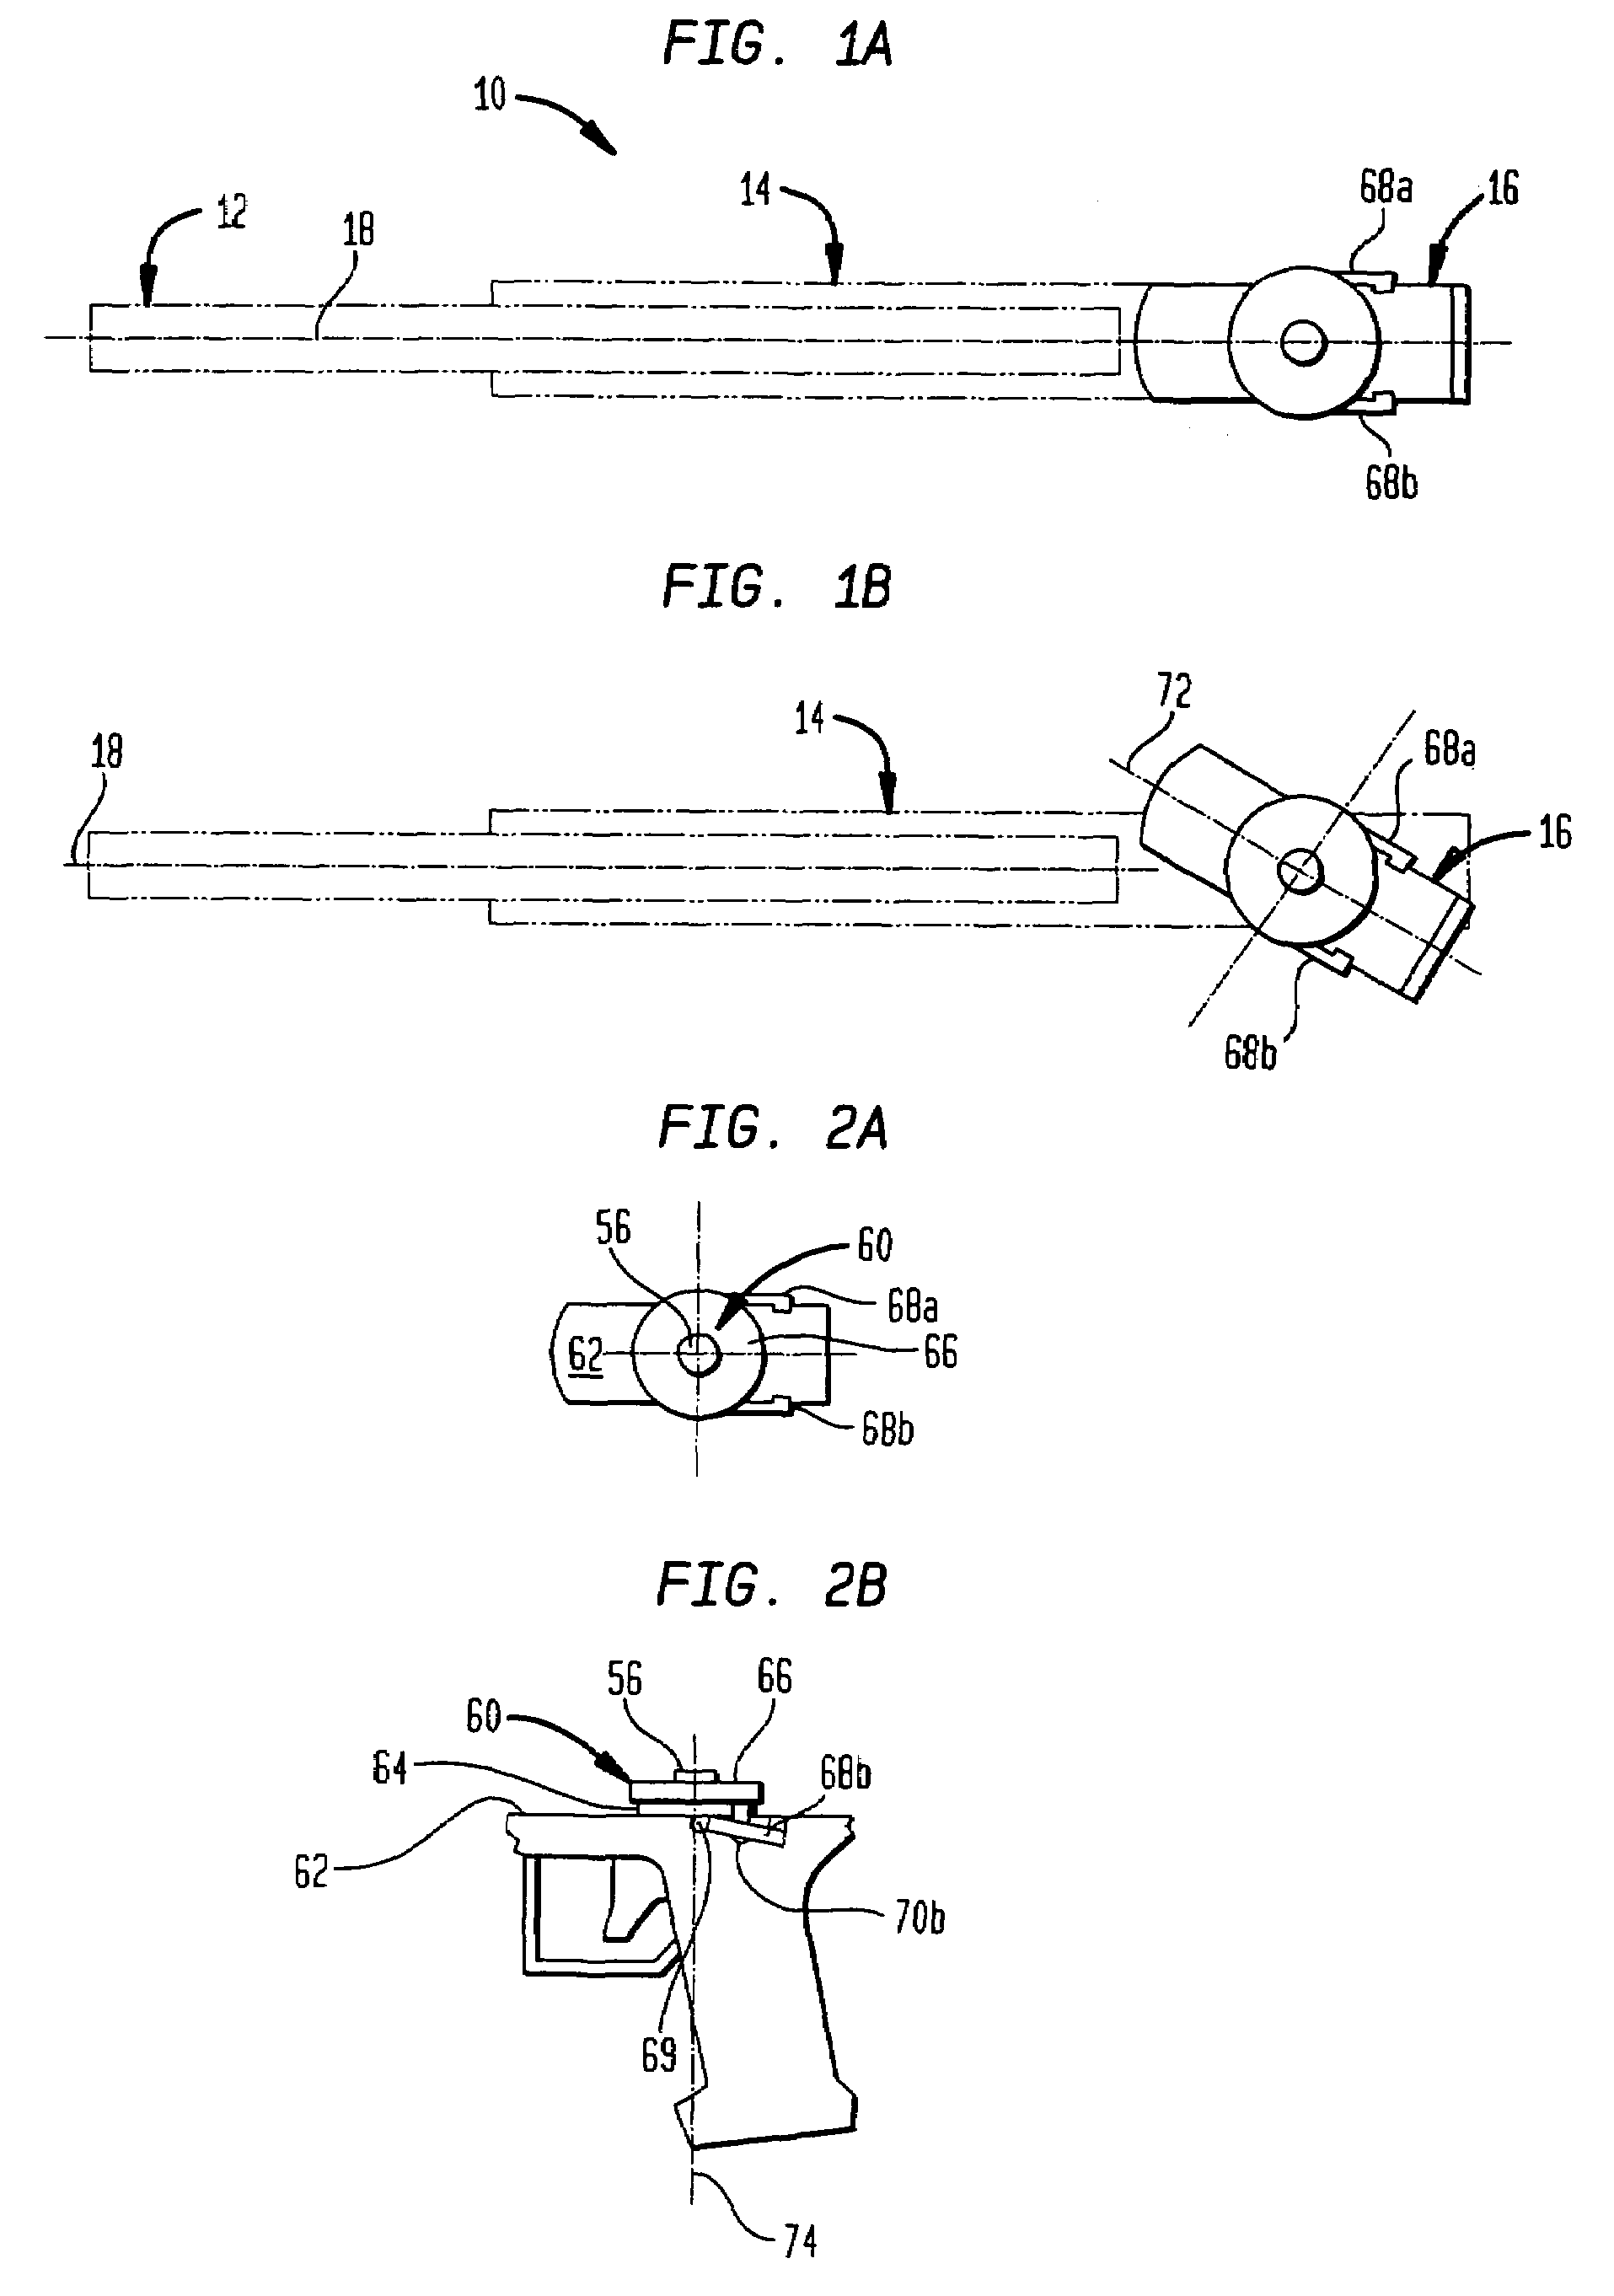 Rotating hand grip trigger assembly for small arms